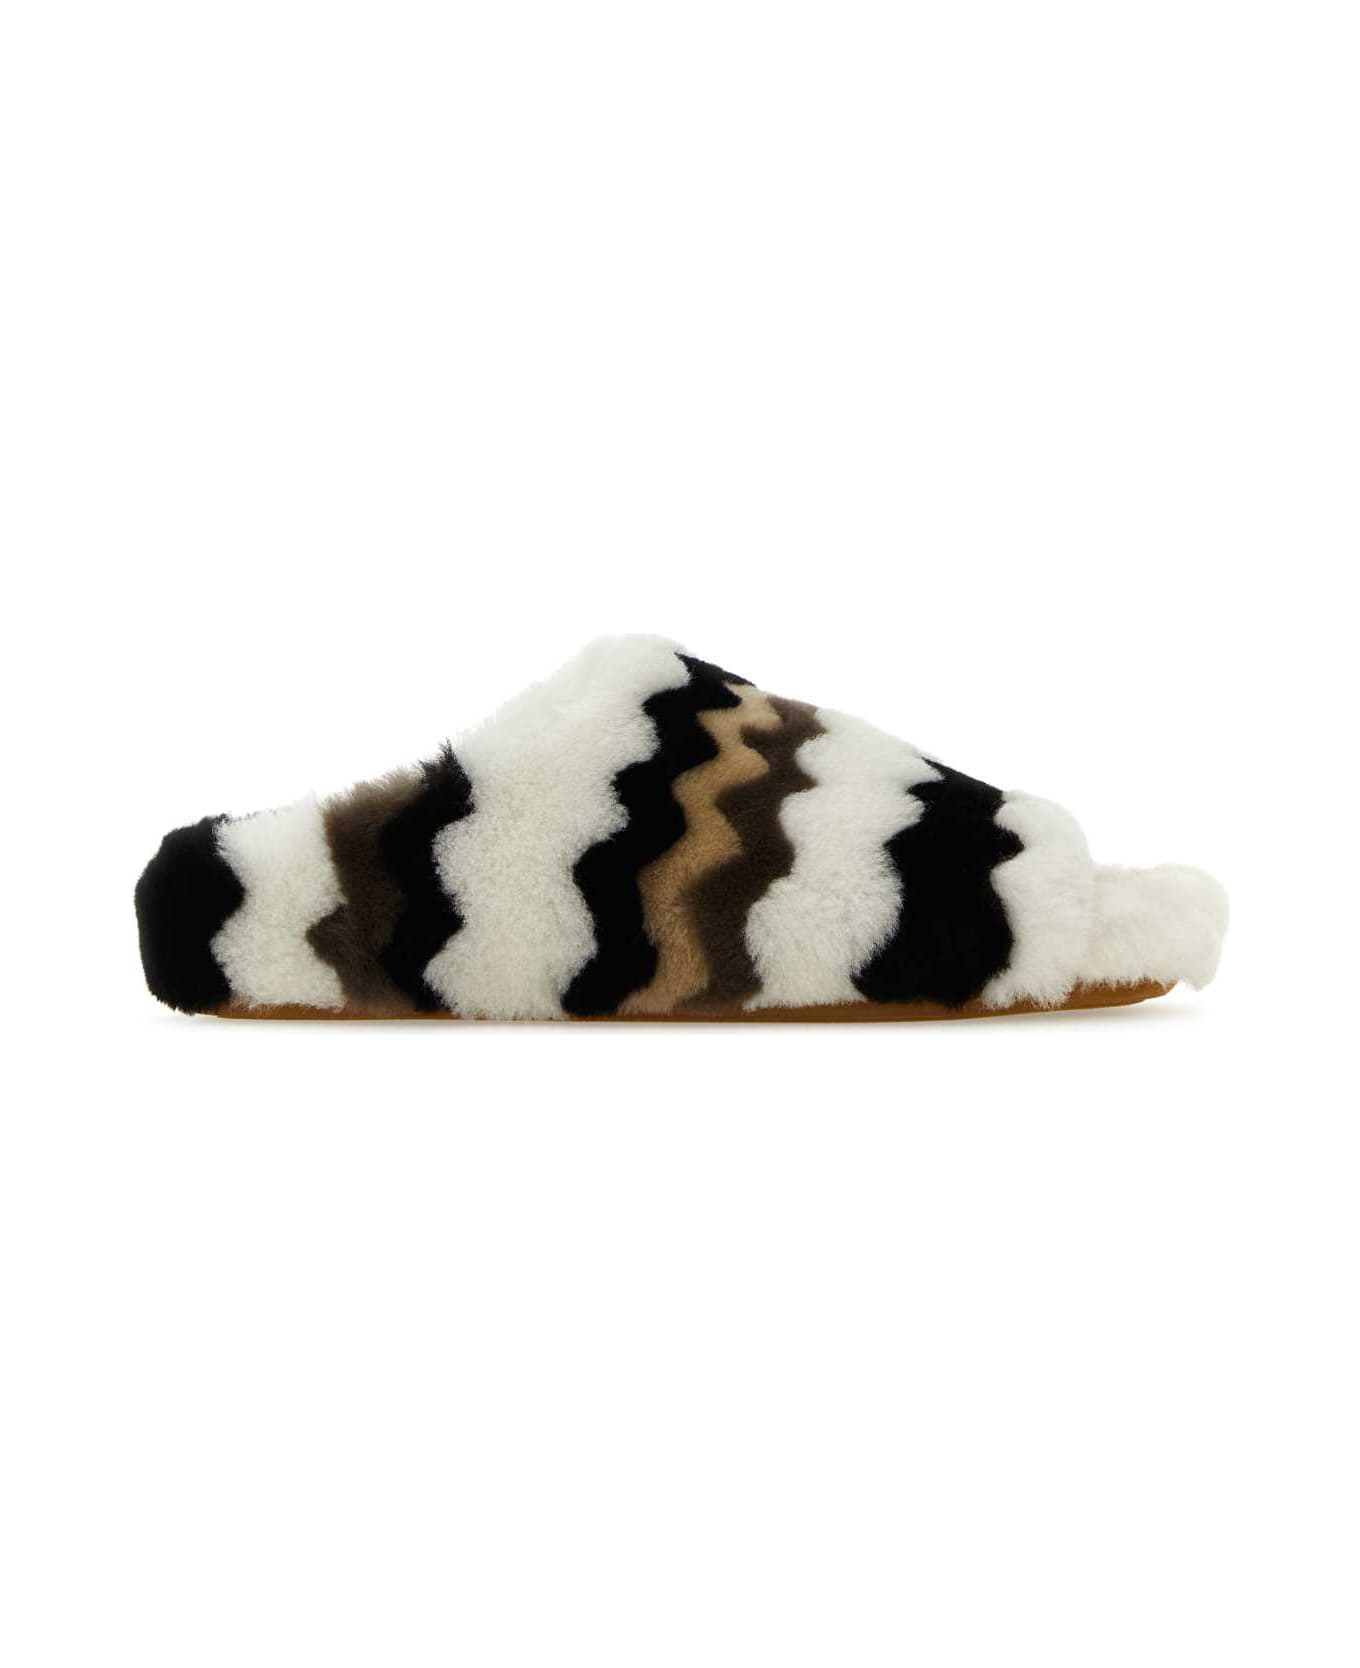 Chloé Eco Fur Slippers - MULTICOLORBROWN1